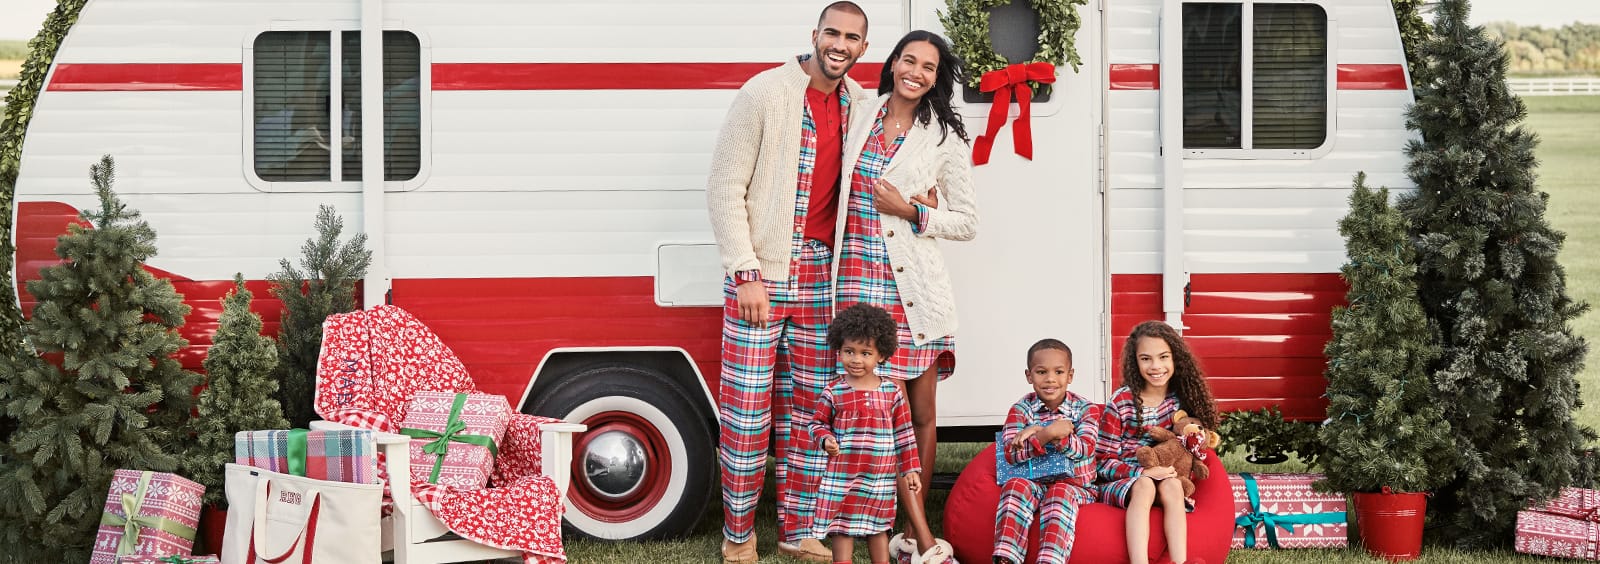 Family Matters: Matching Pajamas for Your Family Reunion | Lands' End